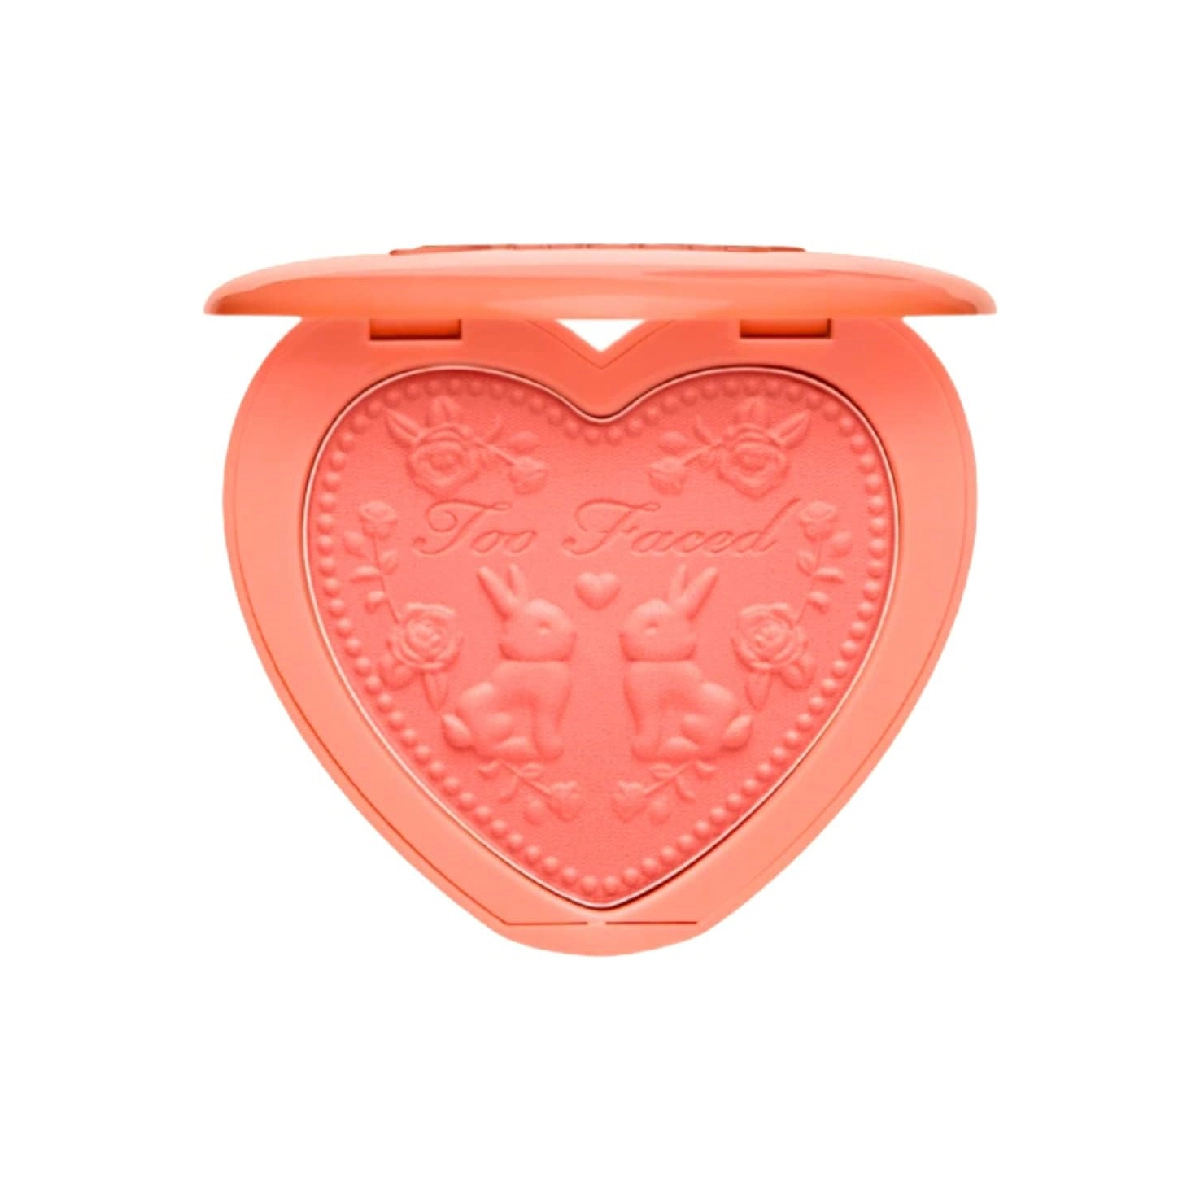 Too Faced Love Flush Blush - a blush compact on a white background